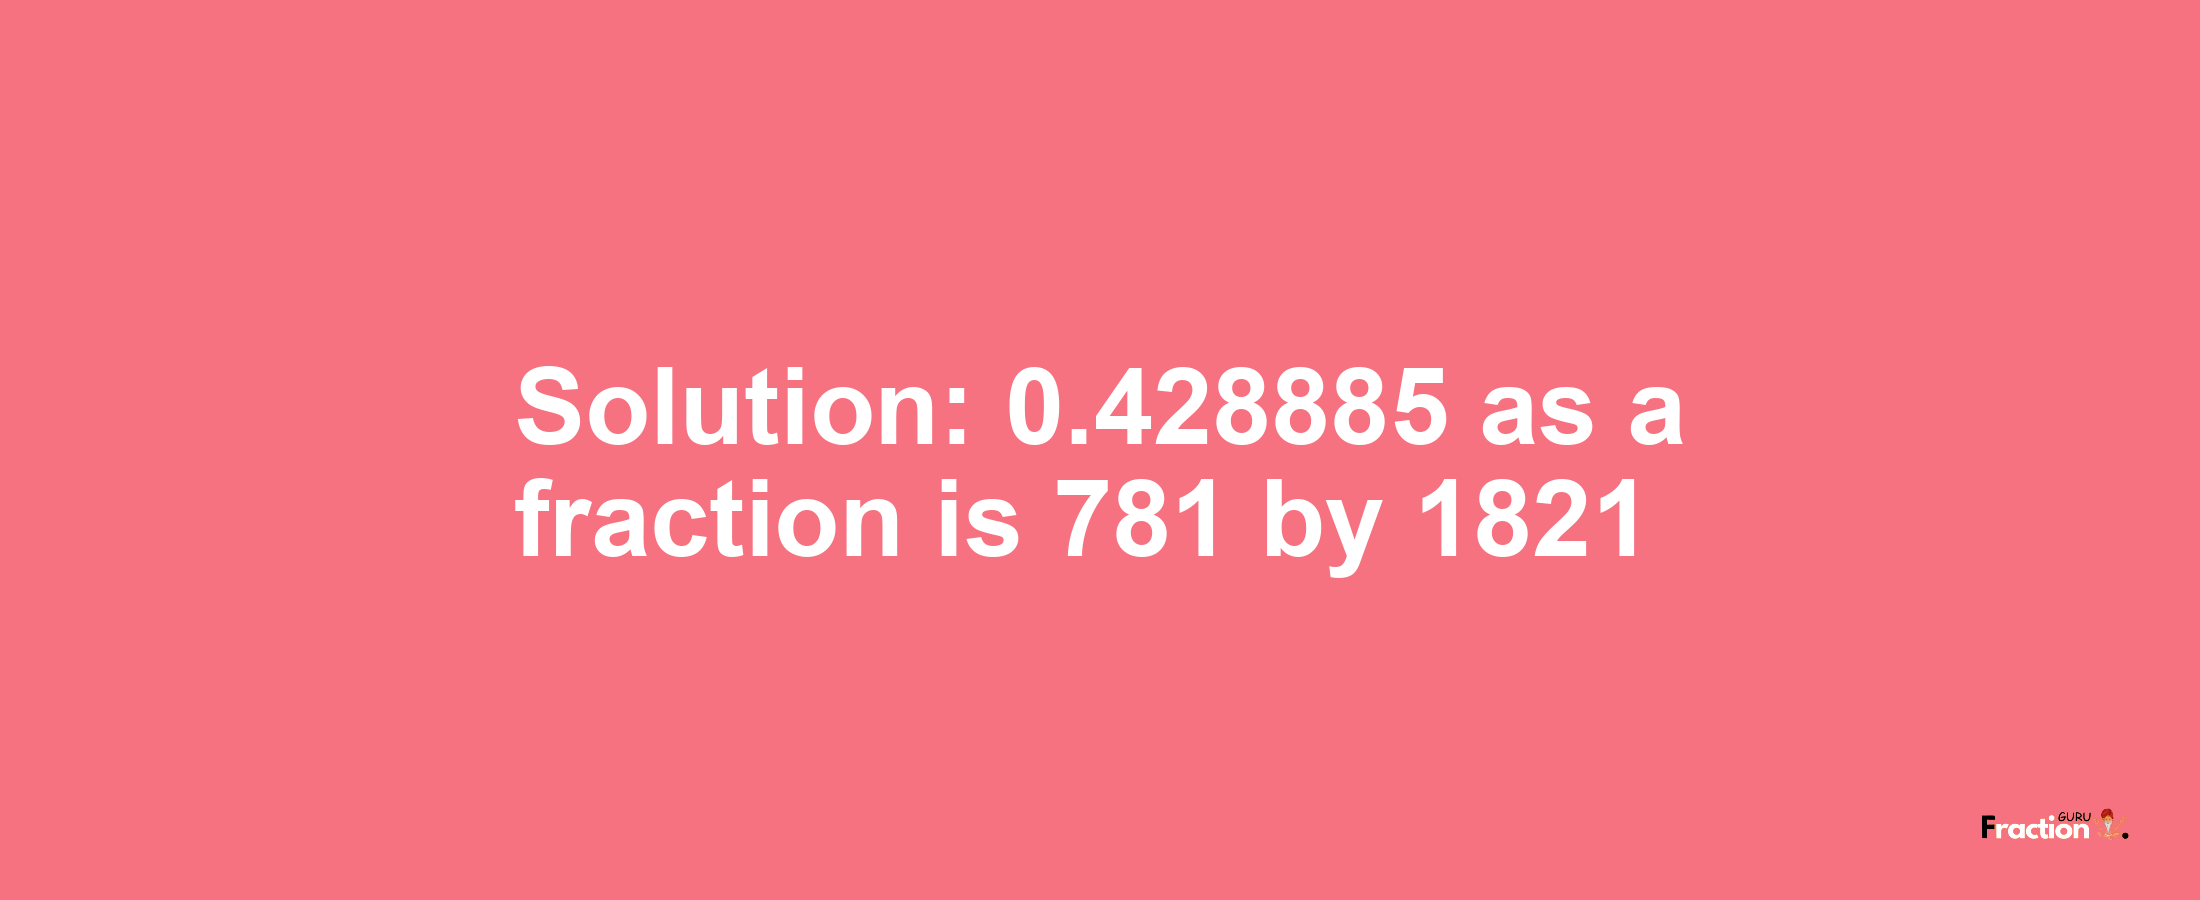 Solution:0.428885 as a fraction is 781/1821